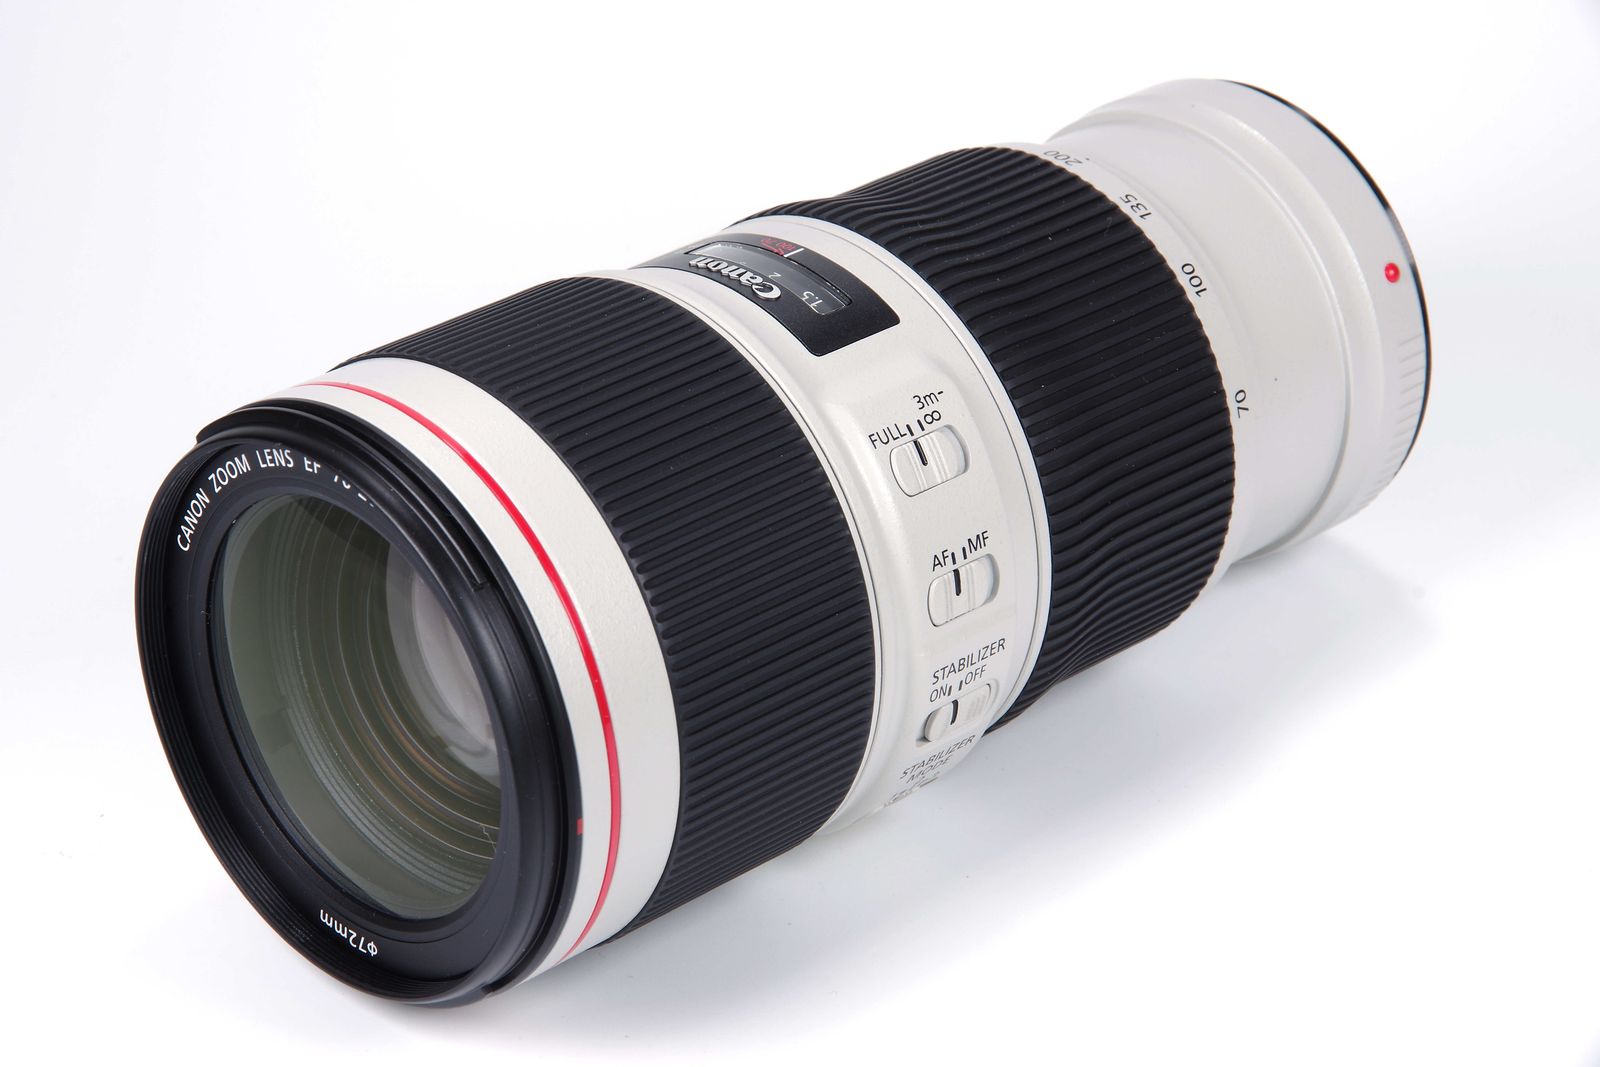 Canon EF 70-200mm f/4L IS II USM Lens Review